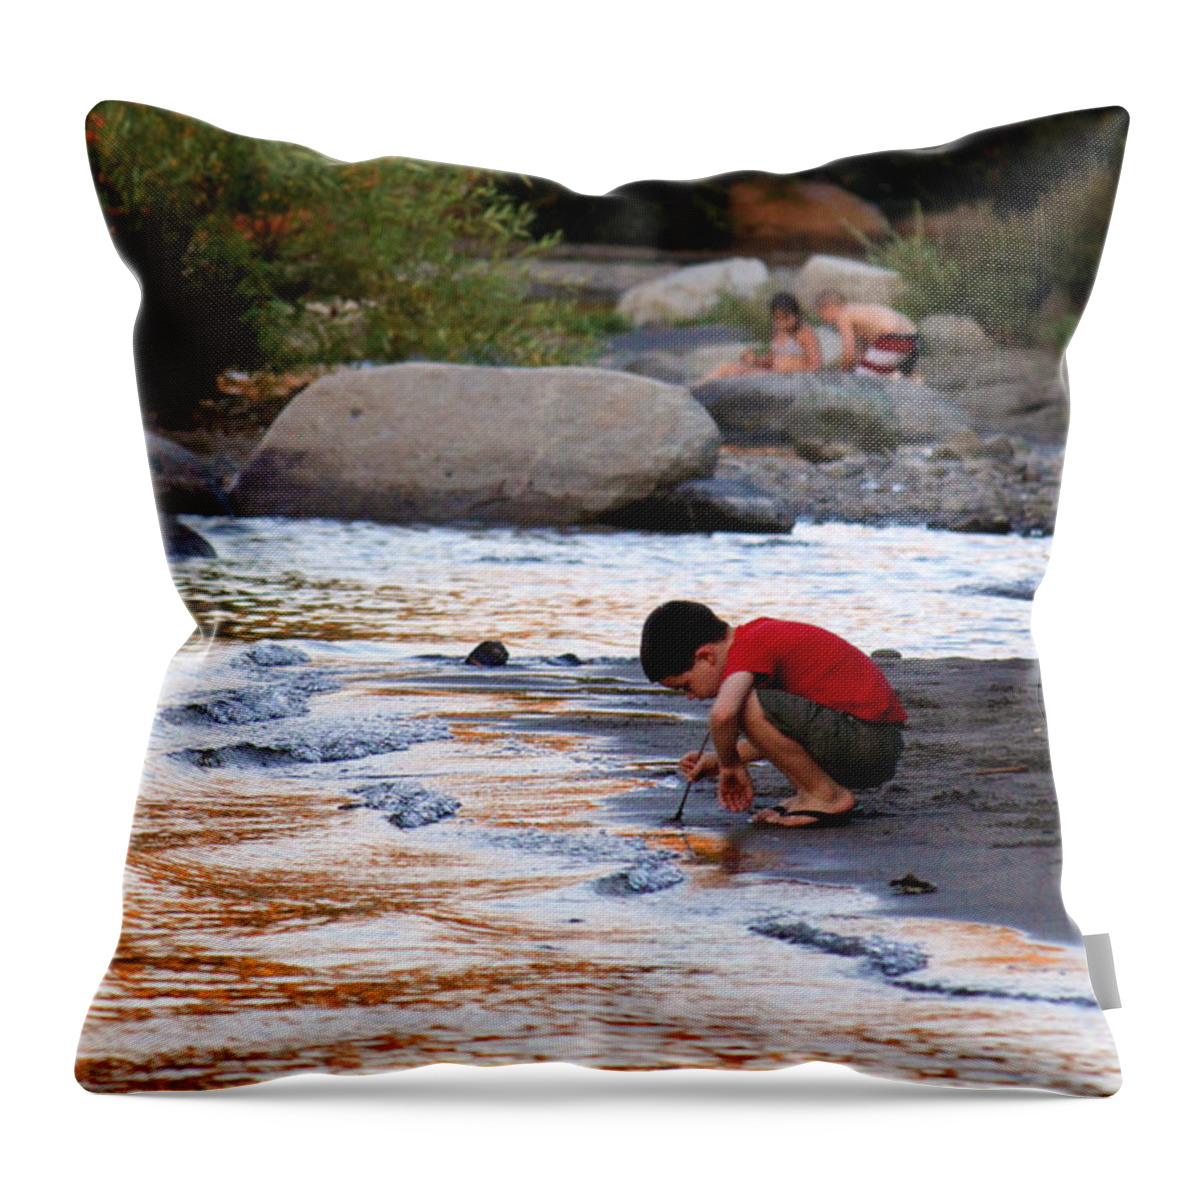 Sunset Throw Pillow featuring the photograph Childs Play by Melanie Lankford Photography